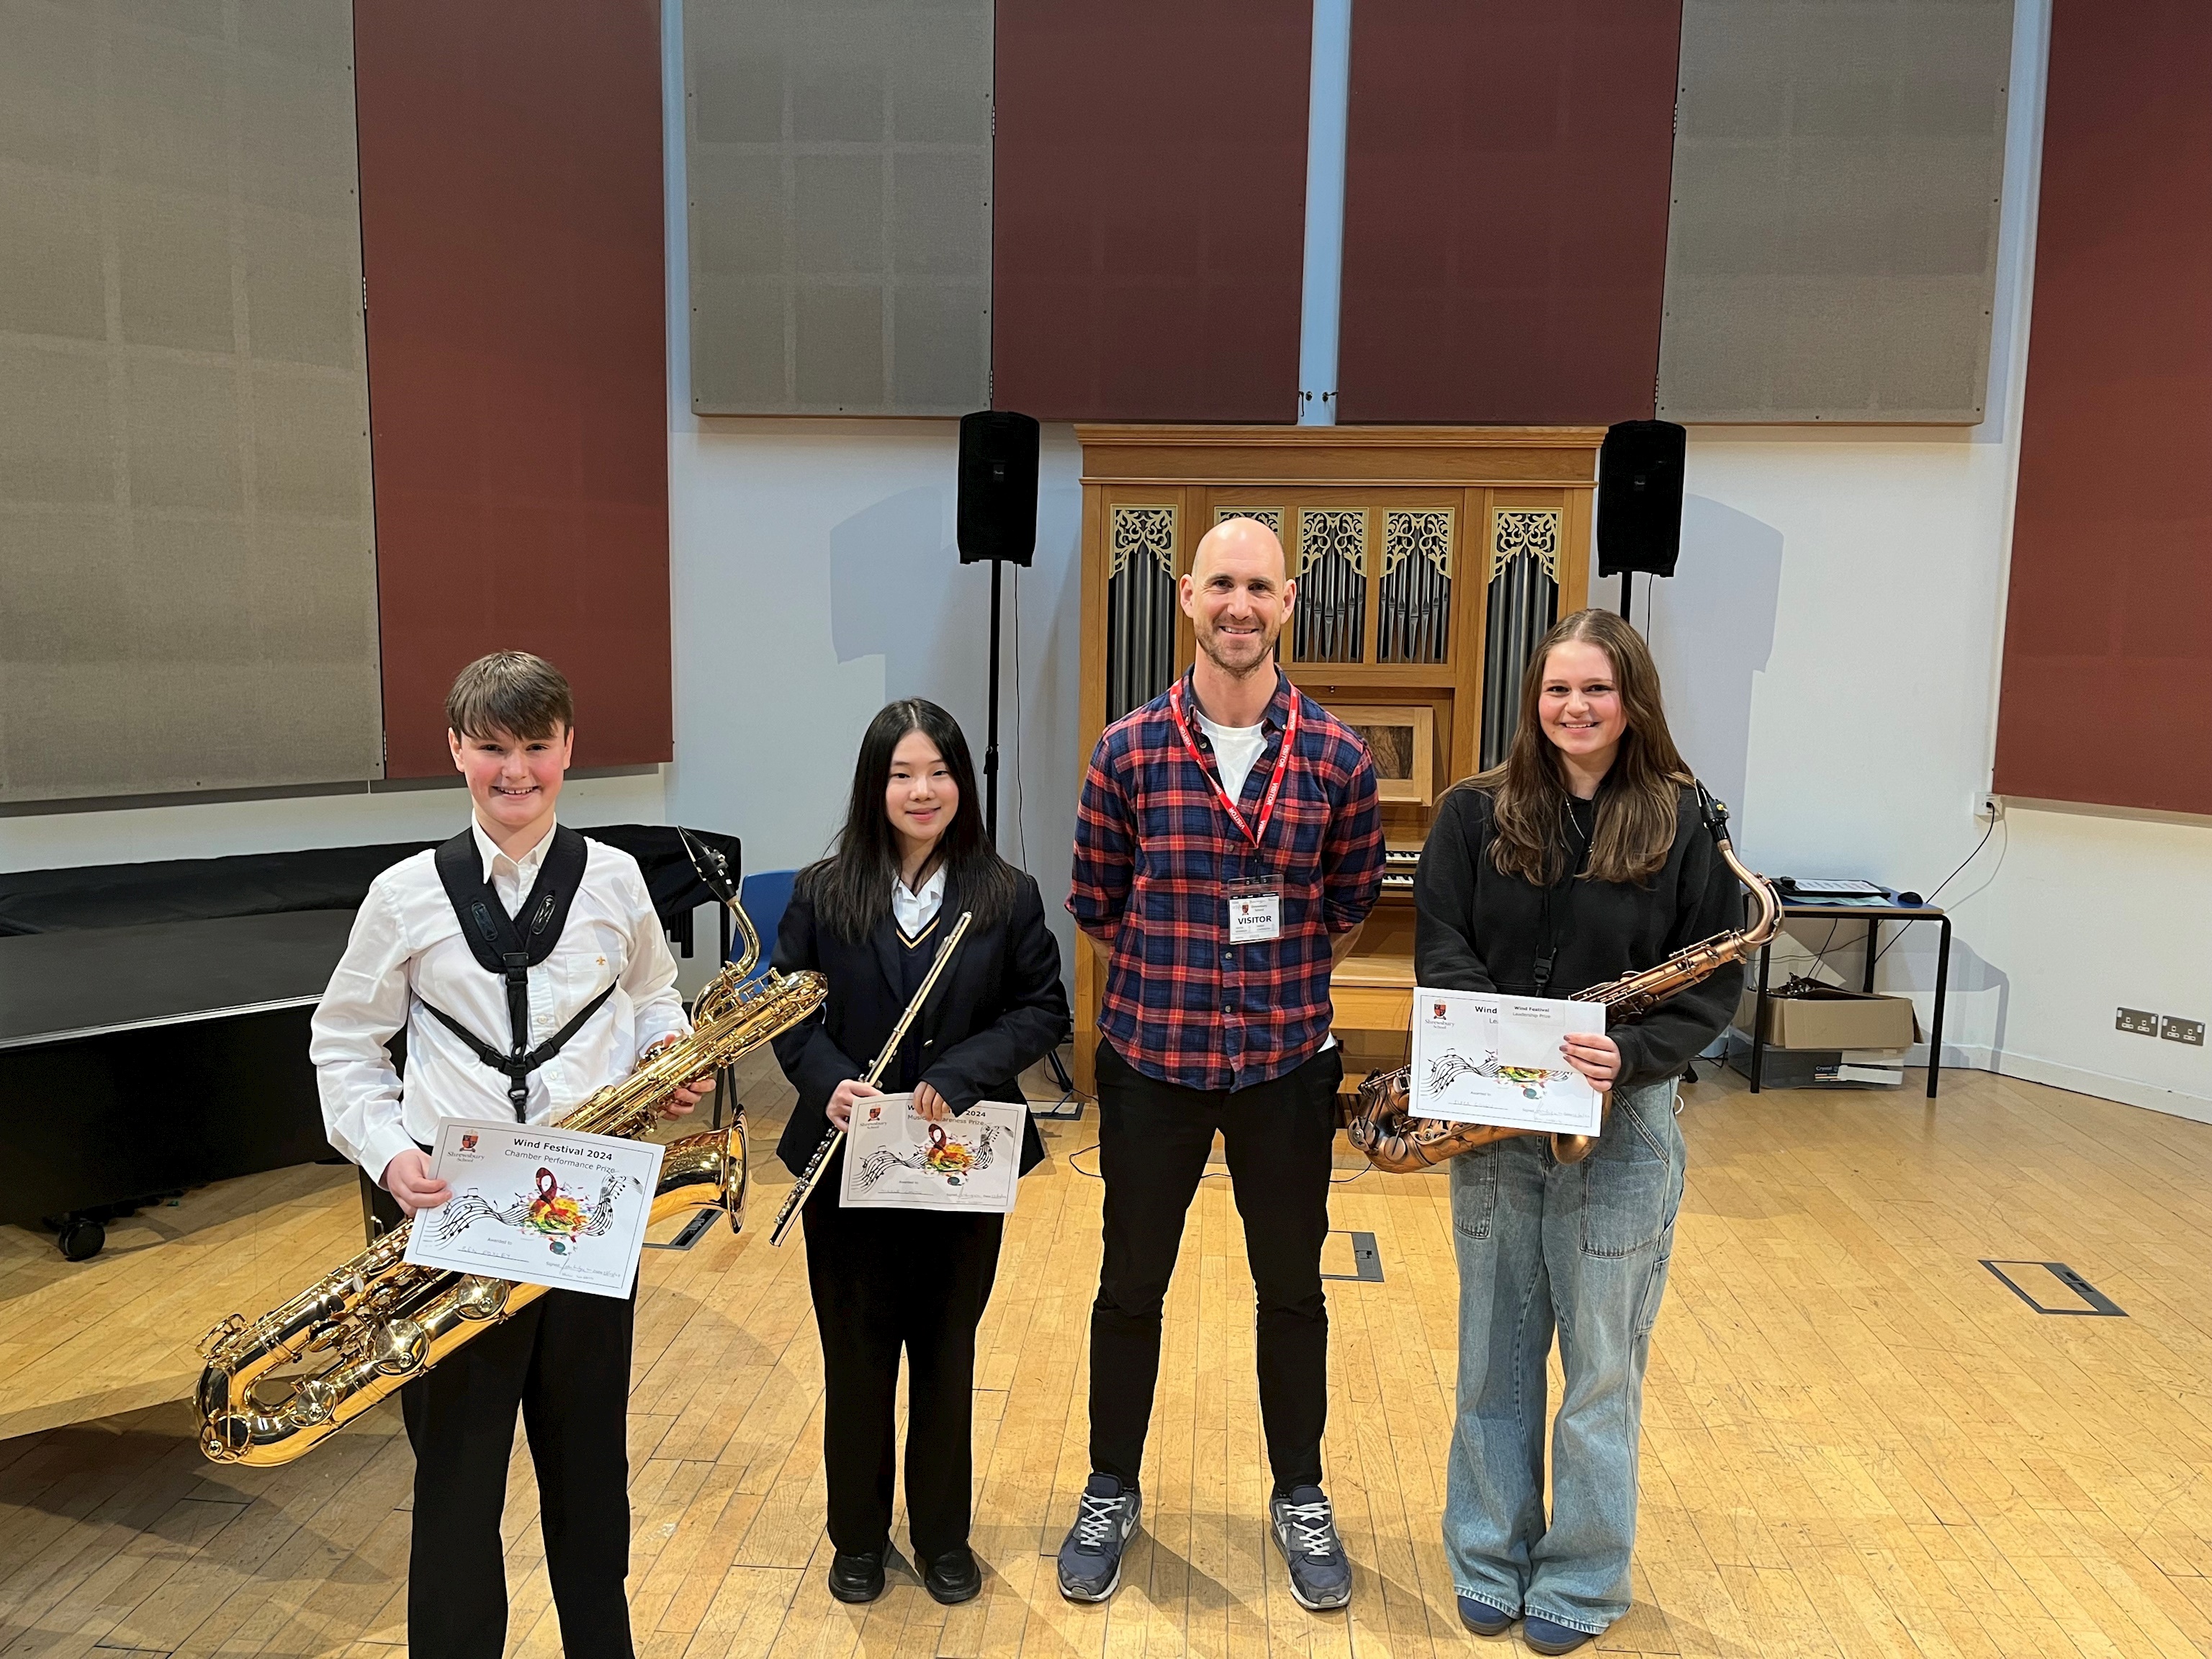 Wind Festival musicians 'deliver some of the finest playing' at annual competition